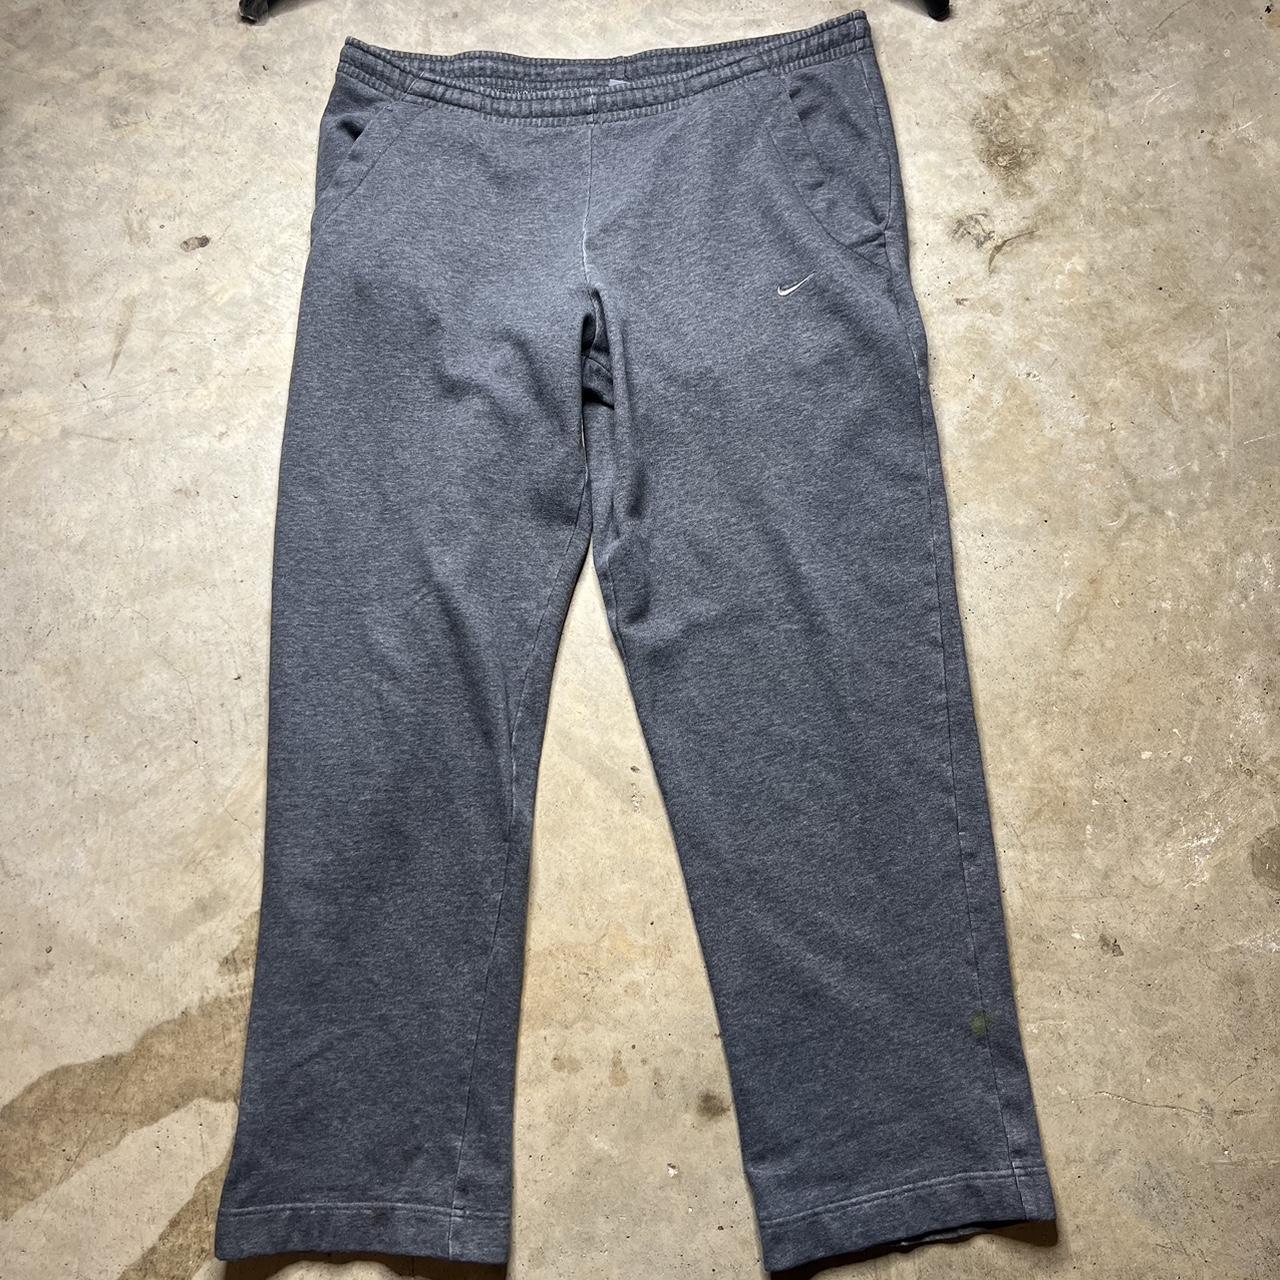 Gray Nike Sweatpants👨‍🍳 Stain shown in pic Great... - Depop